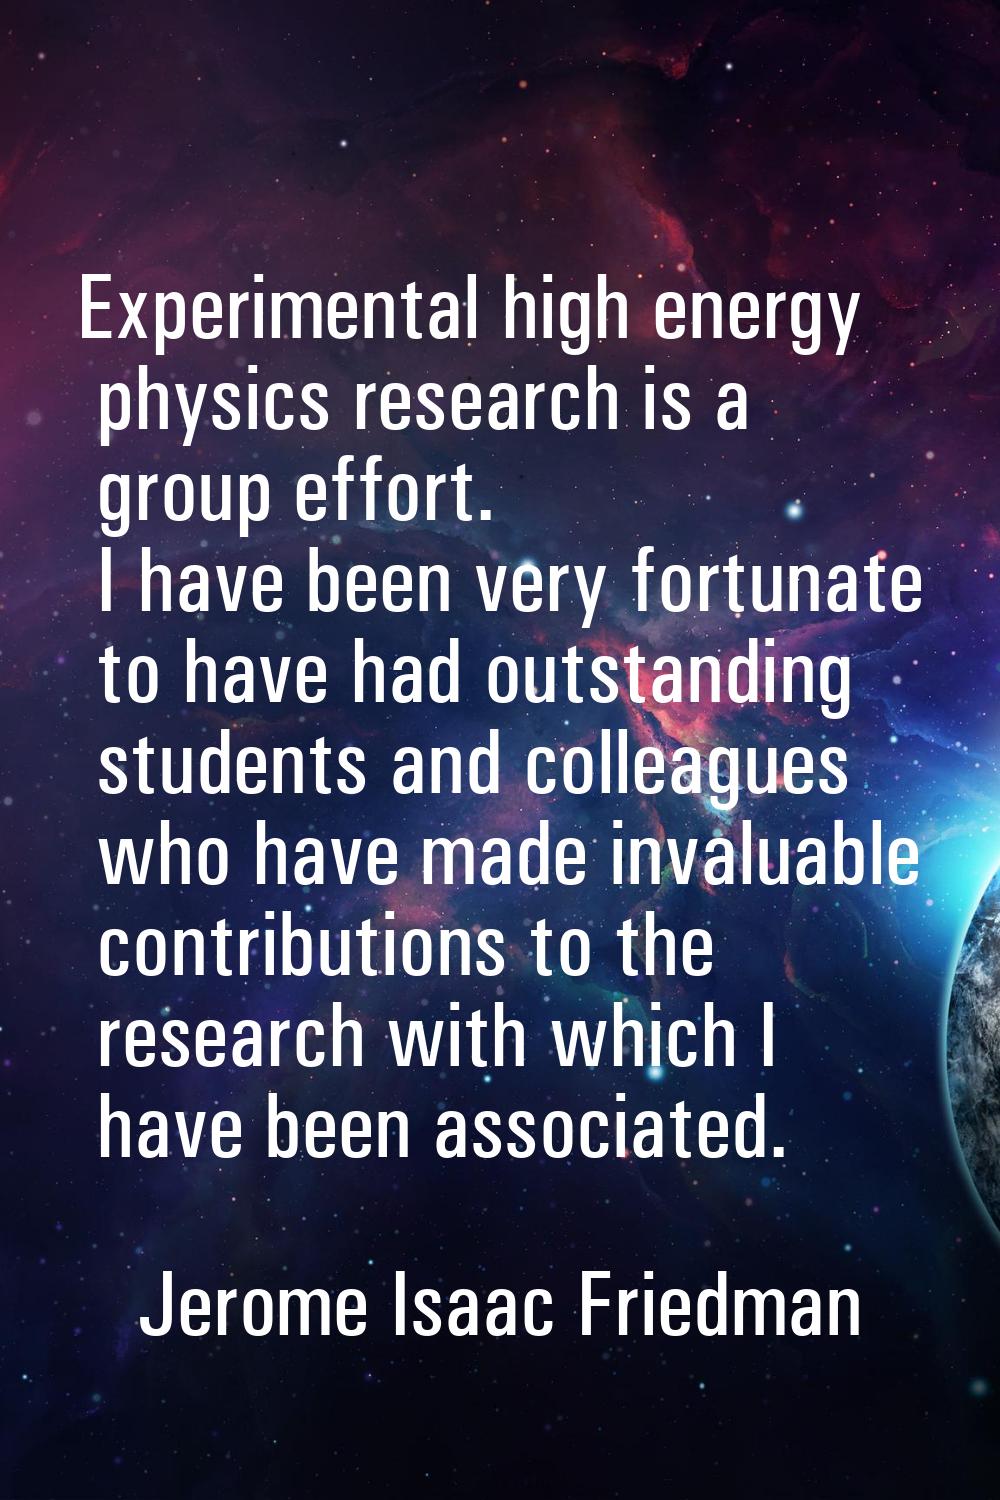 Experimental high energy physics research is a group effort. I have been very fortunate to have had